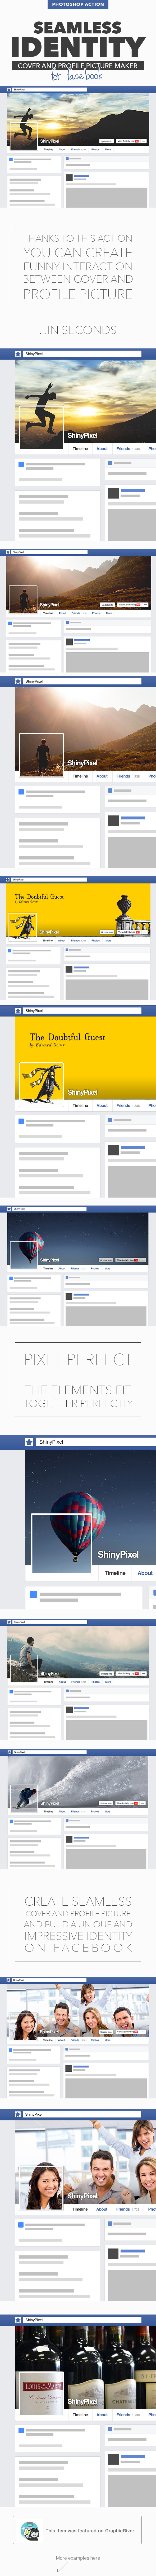 Seamless Identity for Facebook